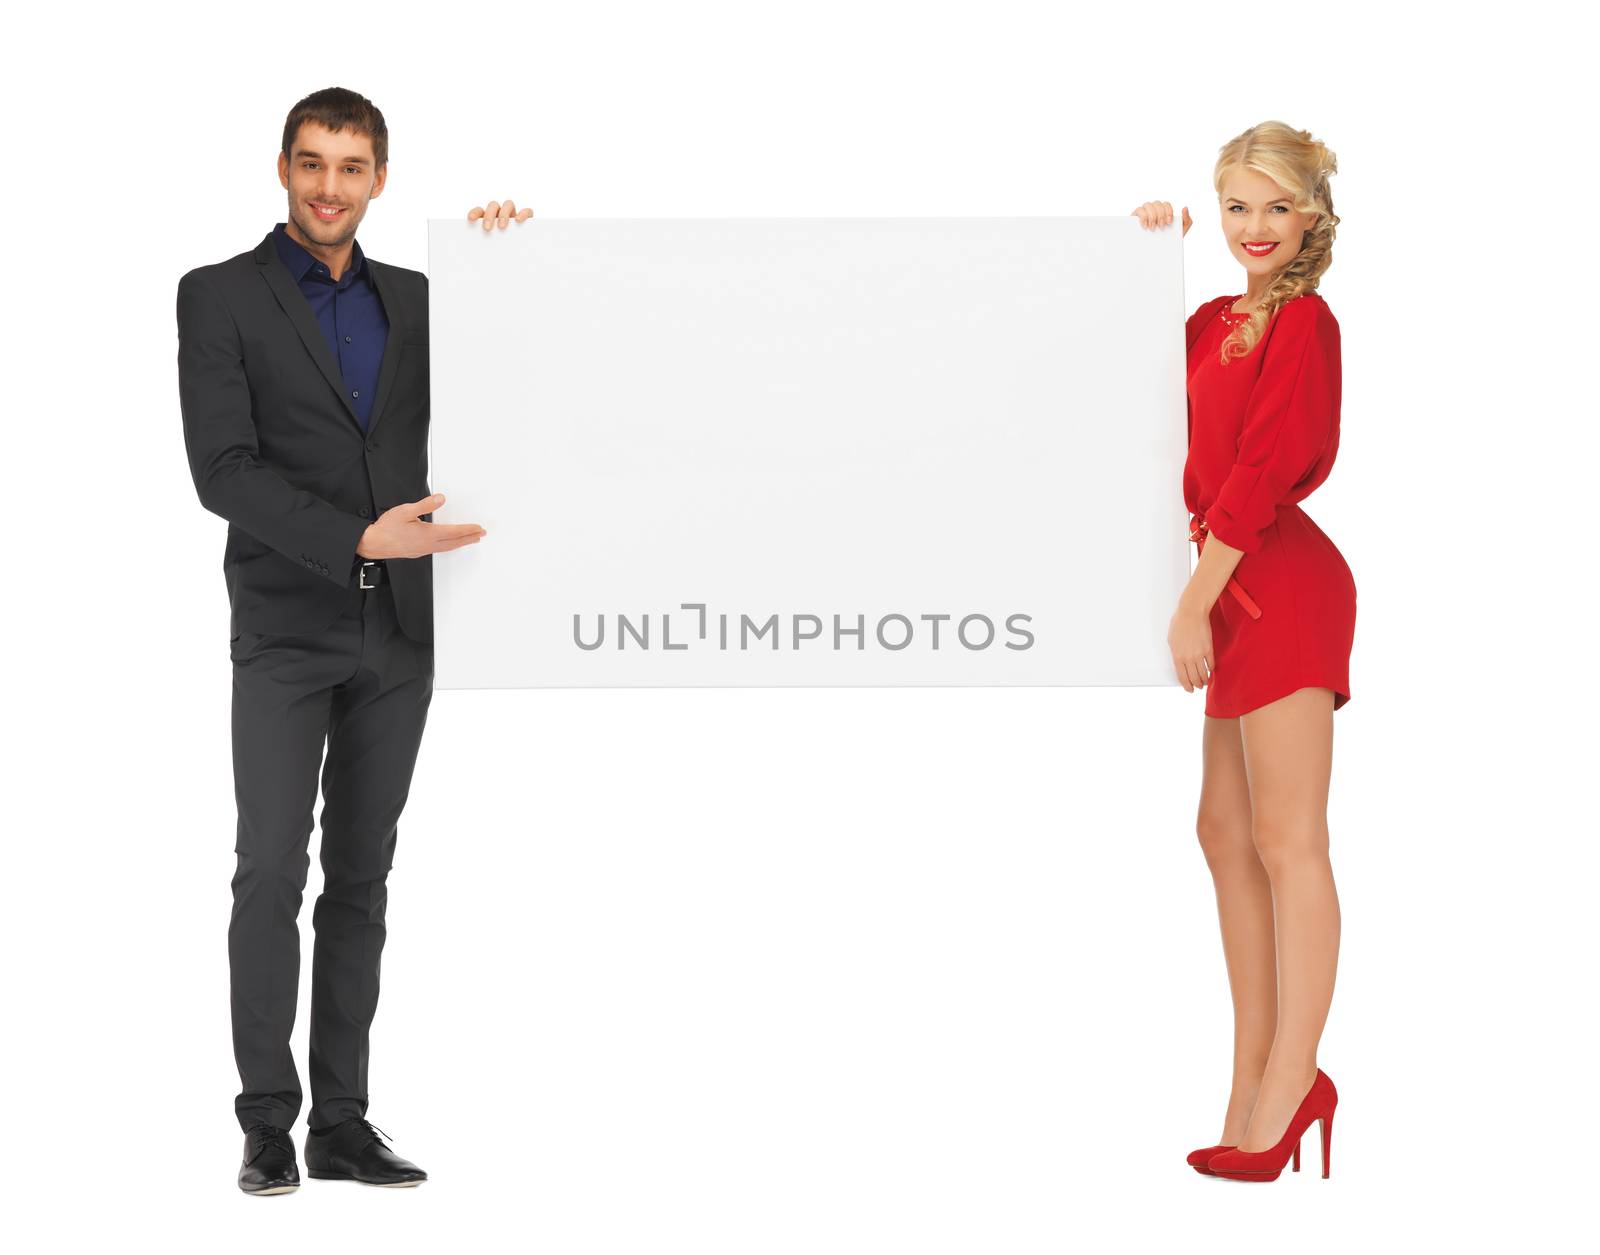 advertising and fashion concept - smiling couple holding big blank white board